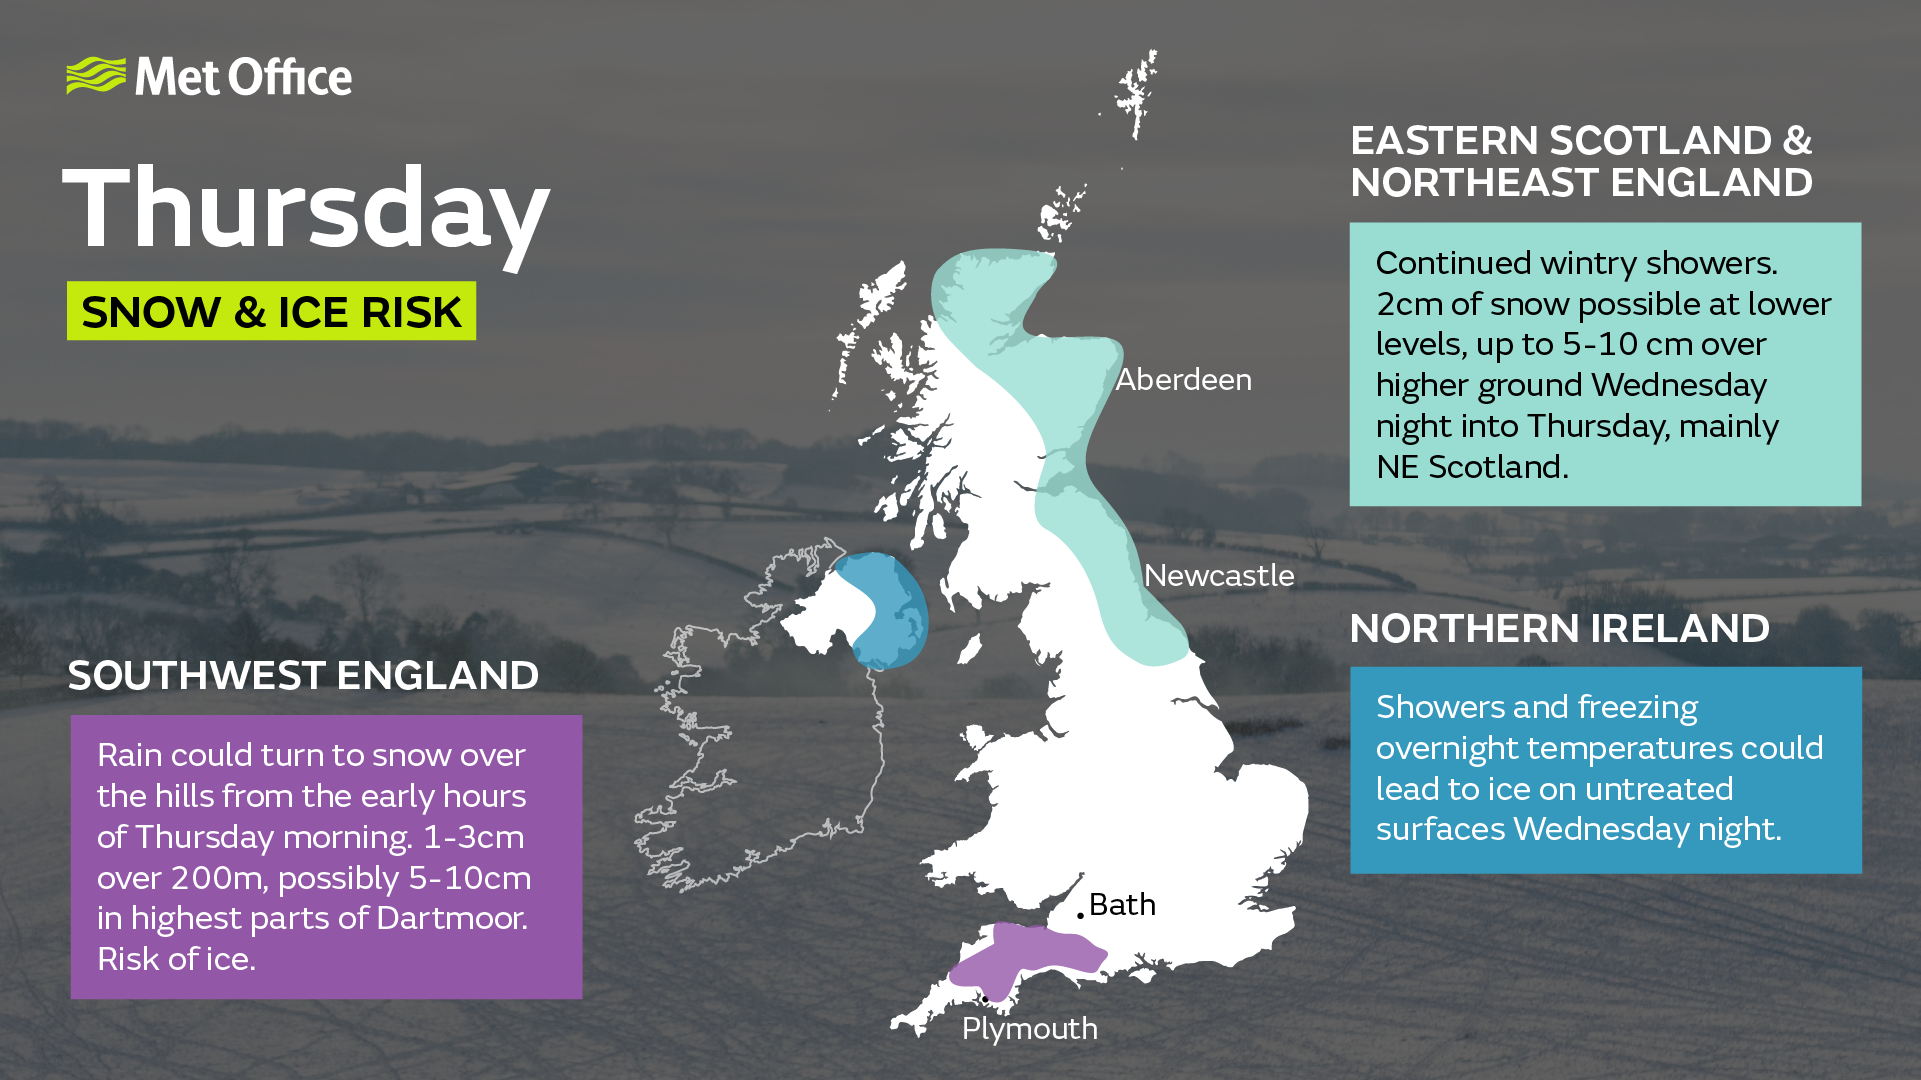 Map of the UK showing chances of snow and ice through Wednesday night and Thursday. For the western half of Northern Ireland wintry showers may lead to icy patches forming on untreated surfaces. In southwest England spells of snow may develop over hills, especially parts of Bodmin Moor, Dartmoor, Blackdown Hills and Exmoor during the early hours of Thursday before petering out later in the day. The highest parts of Dartmoor and perhaps Bodmin Moor may see 5-10cm of snow with some drifting in strong easterly winds. Elsewhere, accumulations are likely to be relatively small, perhaps 1-3cm at most, and mainly in areas inland and above 100-200m. In addition to this, icy patches may also develop on untreated surfaces. In the northeast of the UK wintry showers will continue to affect northern and eastern parts of Scotland and northeast England during Wednesday evening, overnight and into Thursday morning. These are likely to fall onto frozen surfaces allowing icy patches to form. Additionally, showers will fall as snow inland, with up to 2cm possible in places, perhaps as much as 5 cm over high ground.